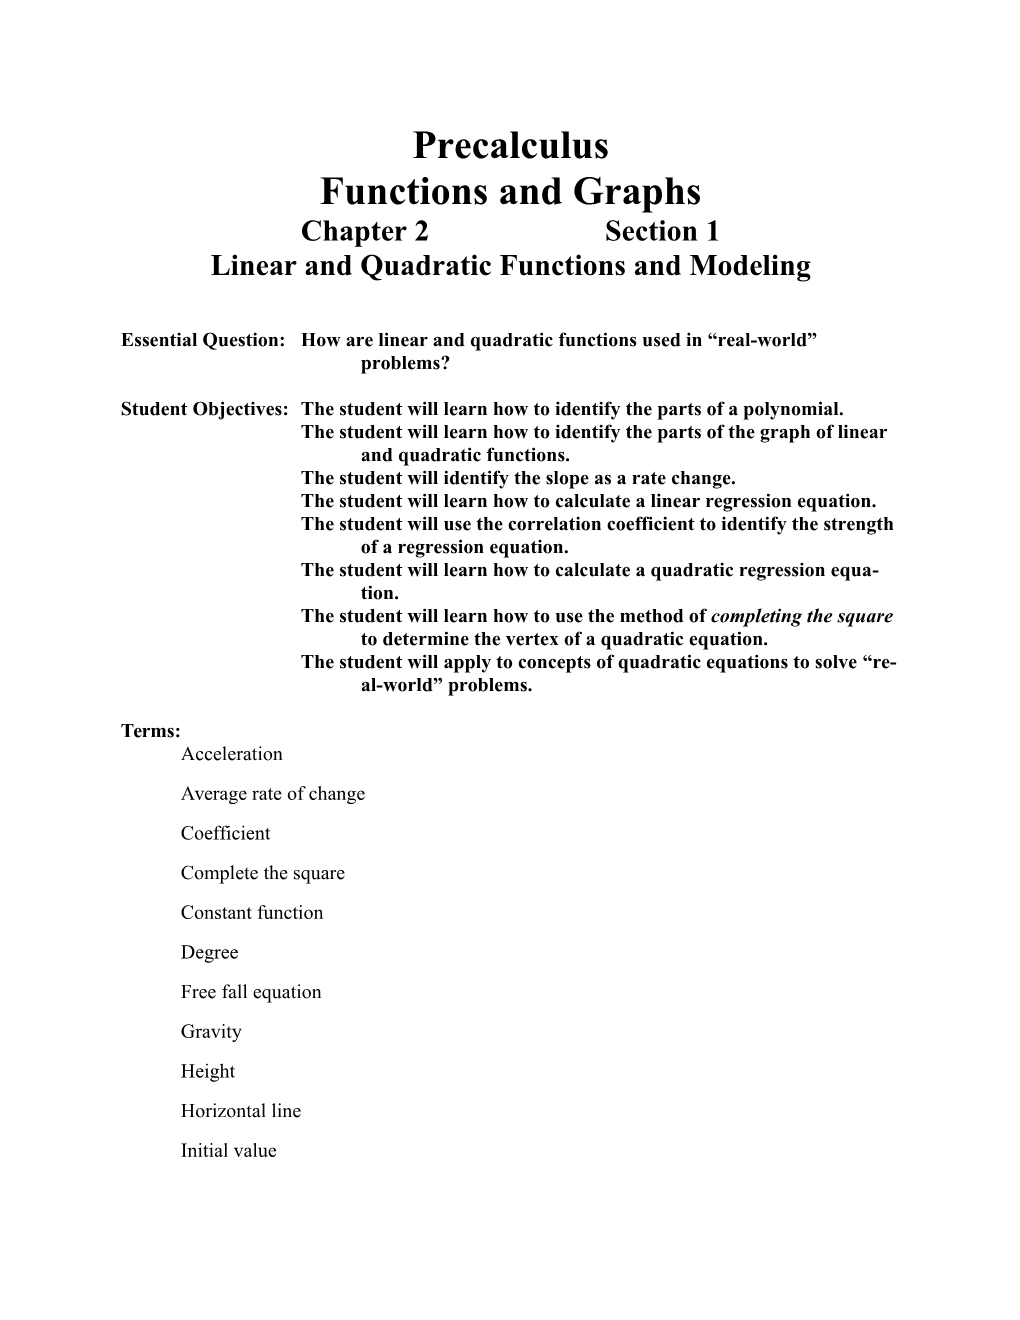 Linear and Quadratic Functions and Modeling